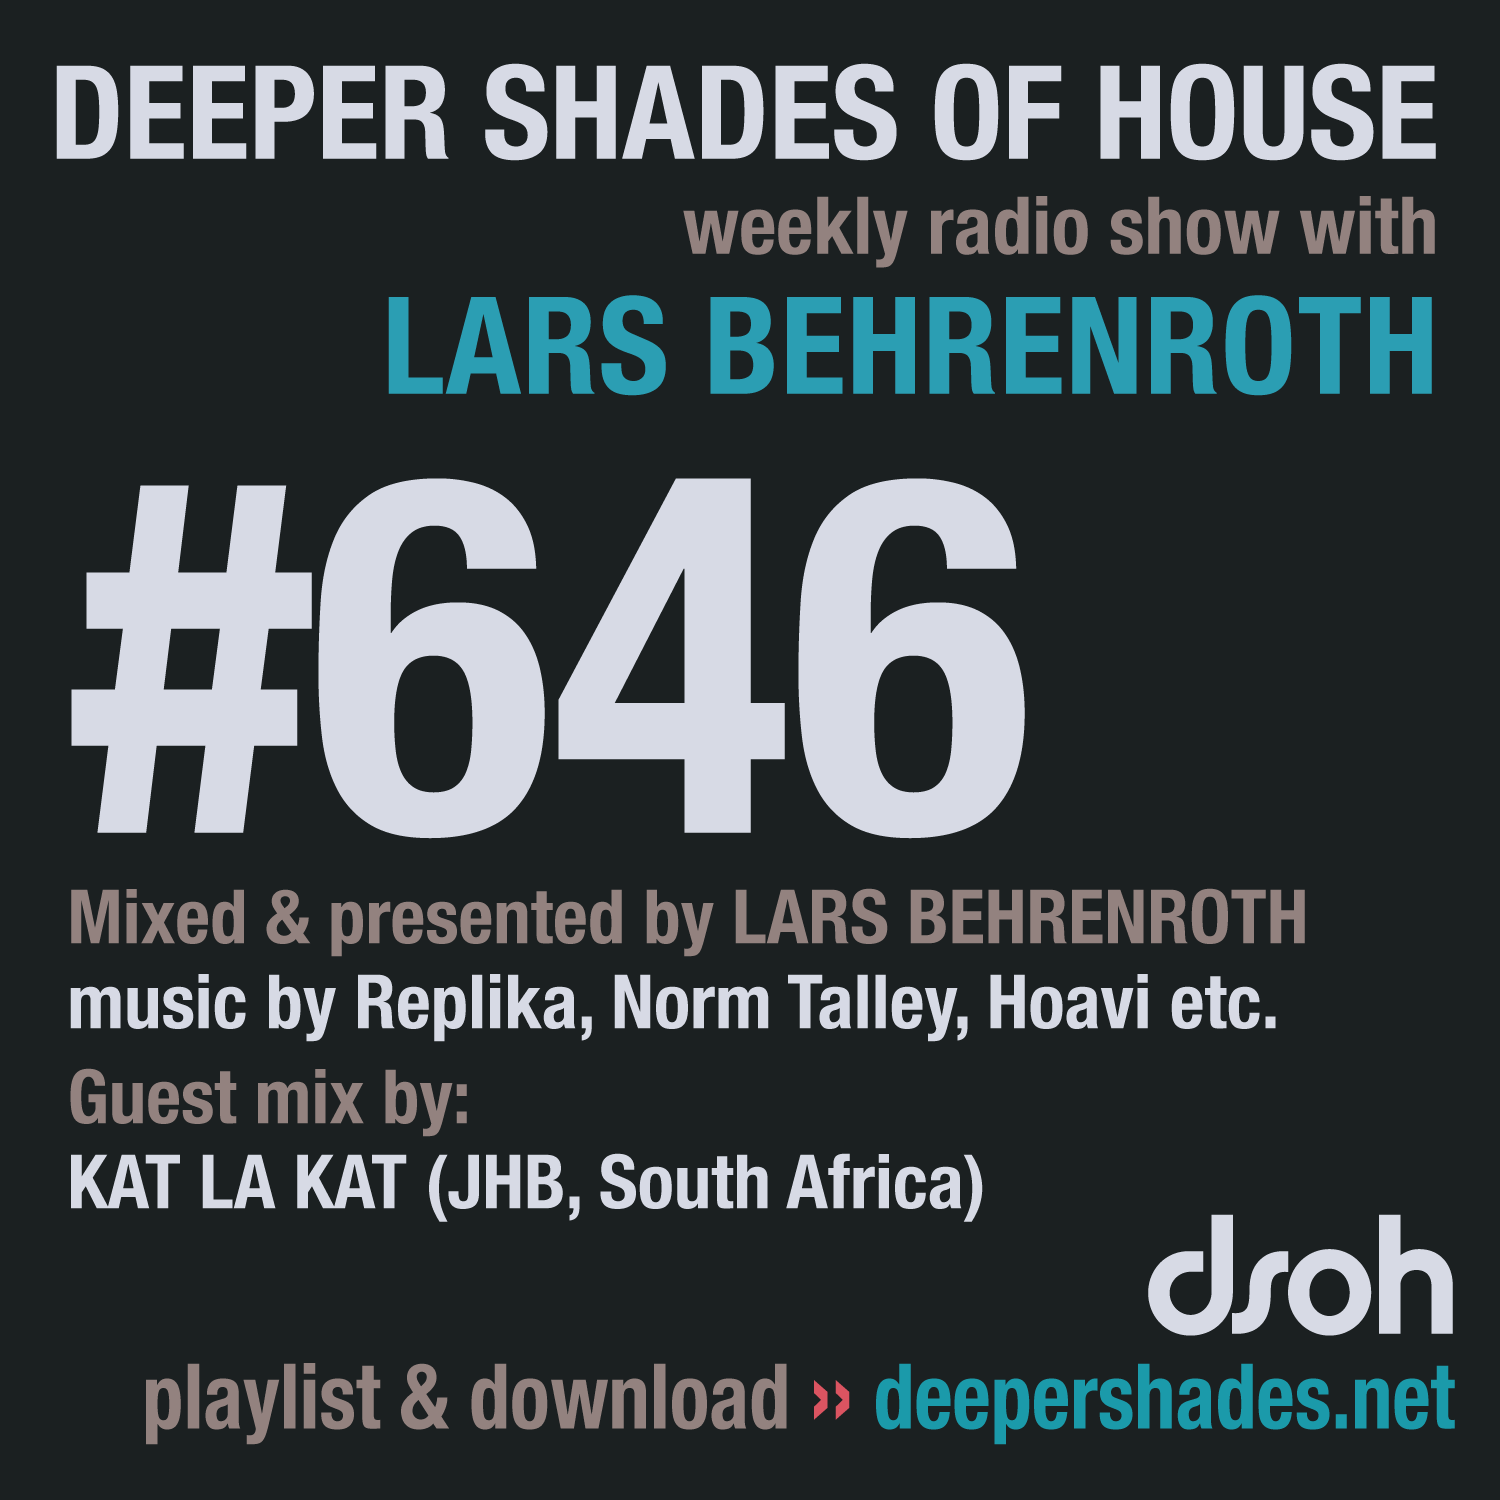 Deeper Shades Of House 646